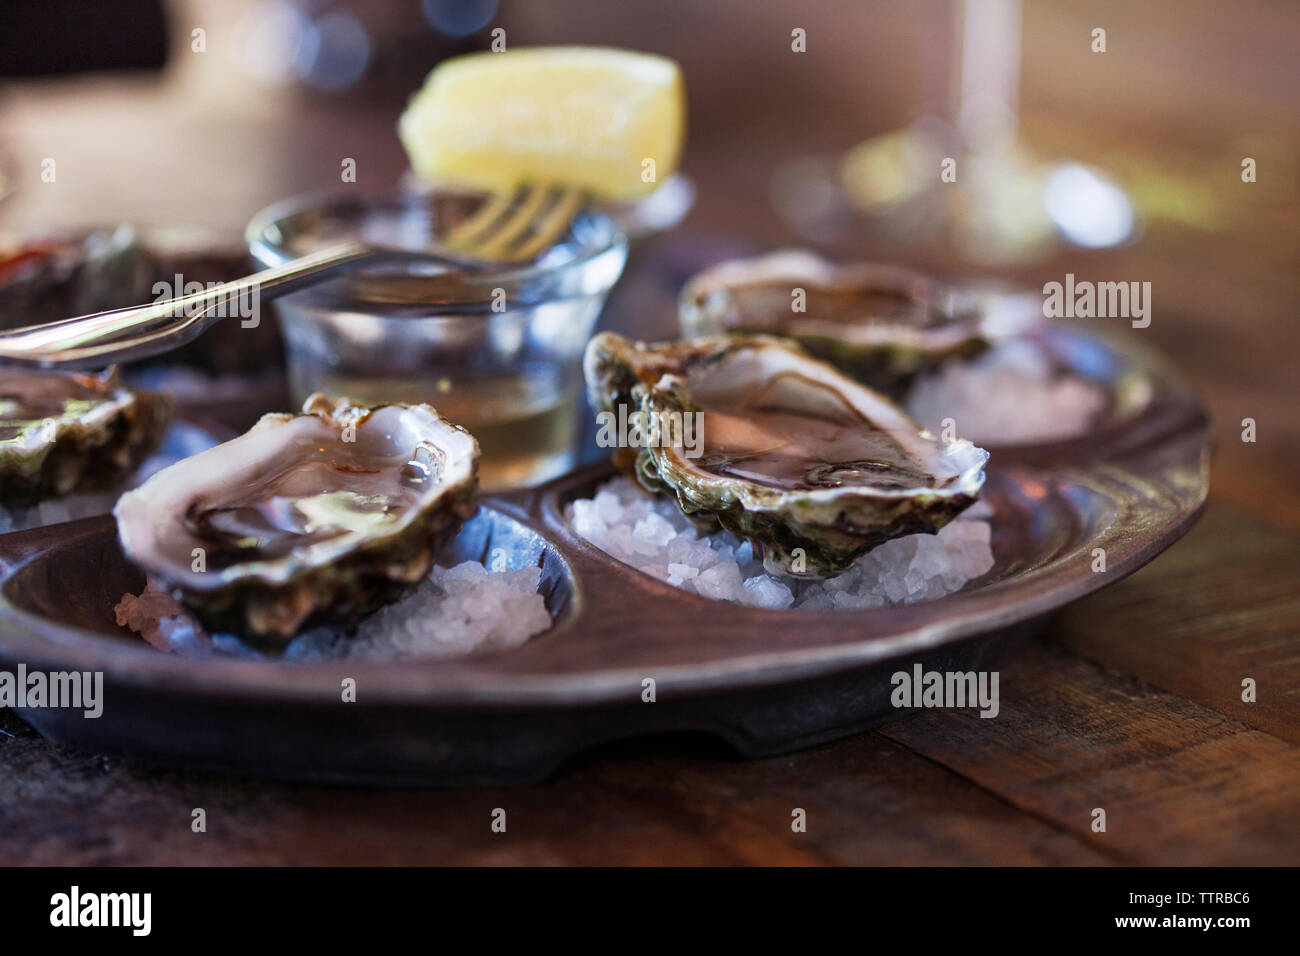 Oyster shells served on table Stock Photo